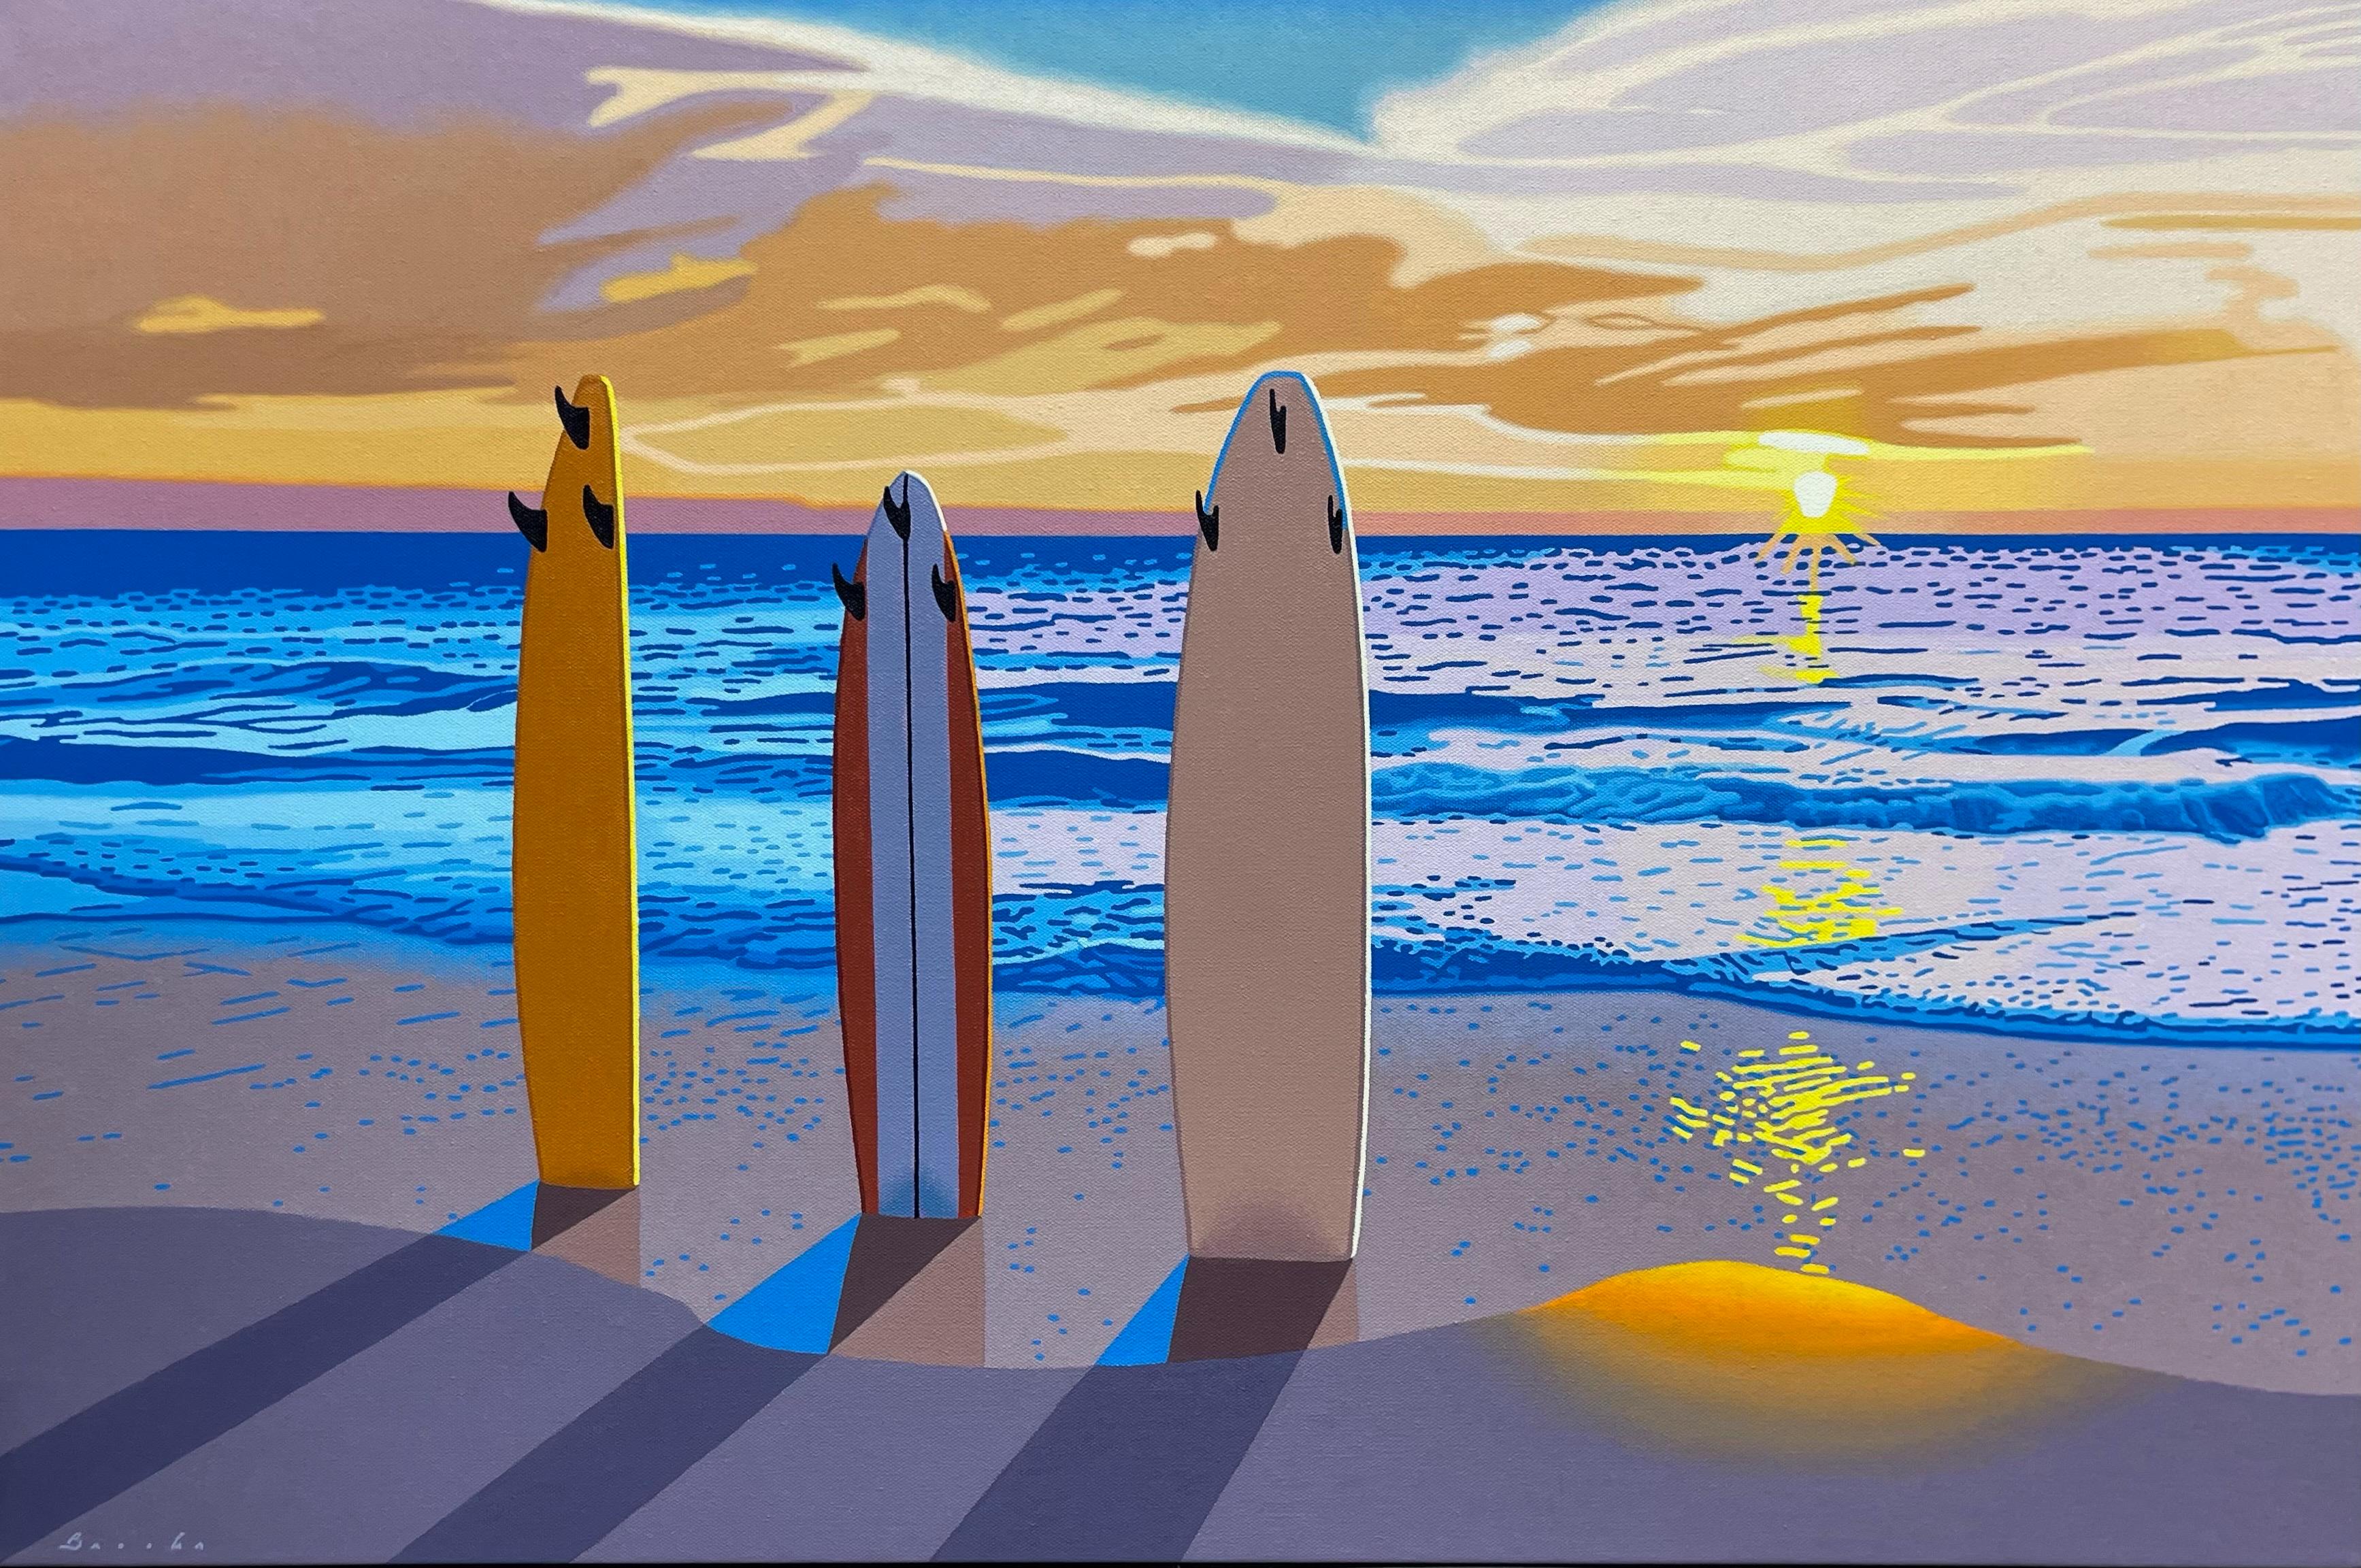 “Dawn Patrol” illustrative oil painting depicting surf boards and horizon - Painting by Rob Brooks